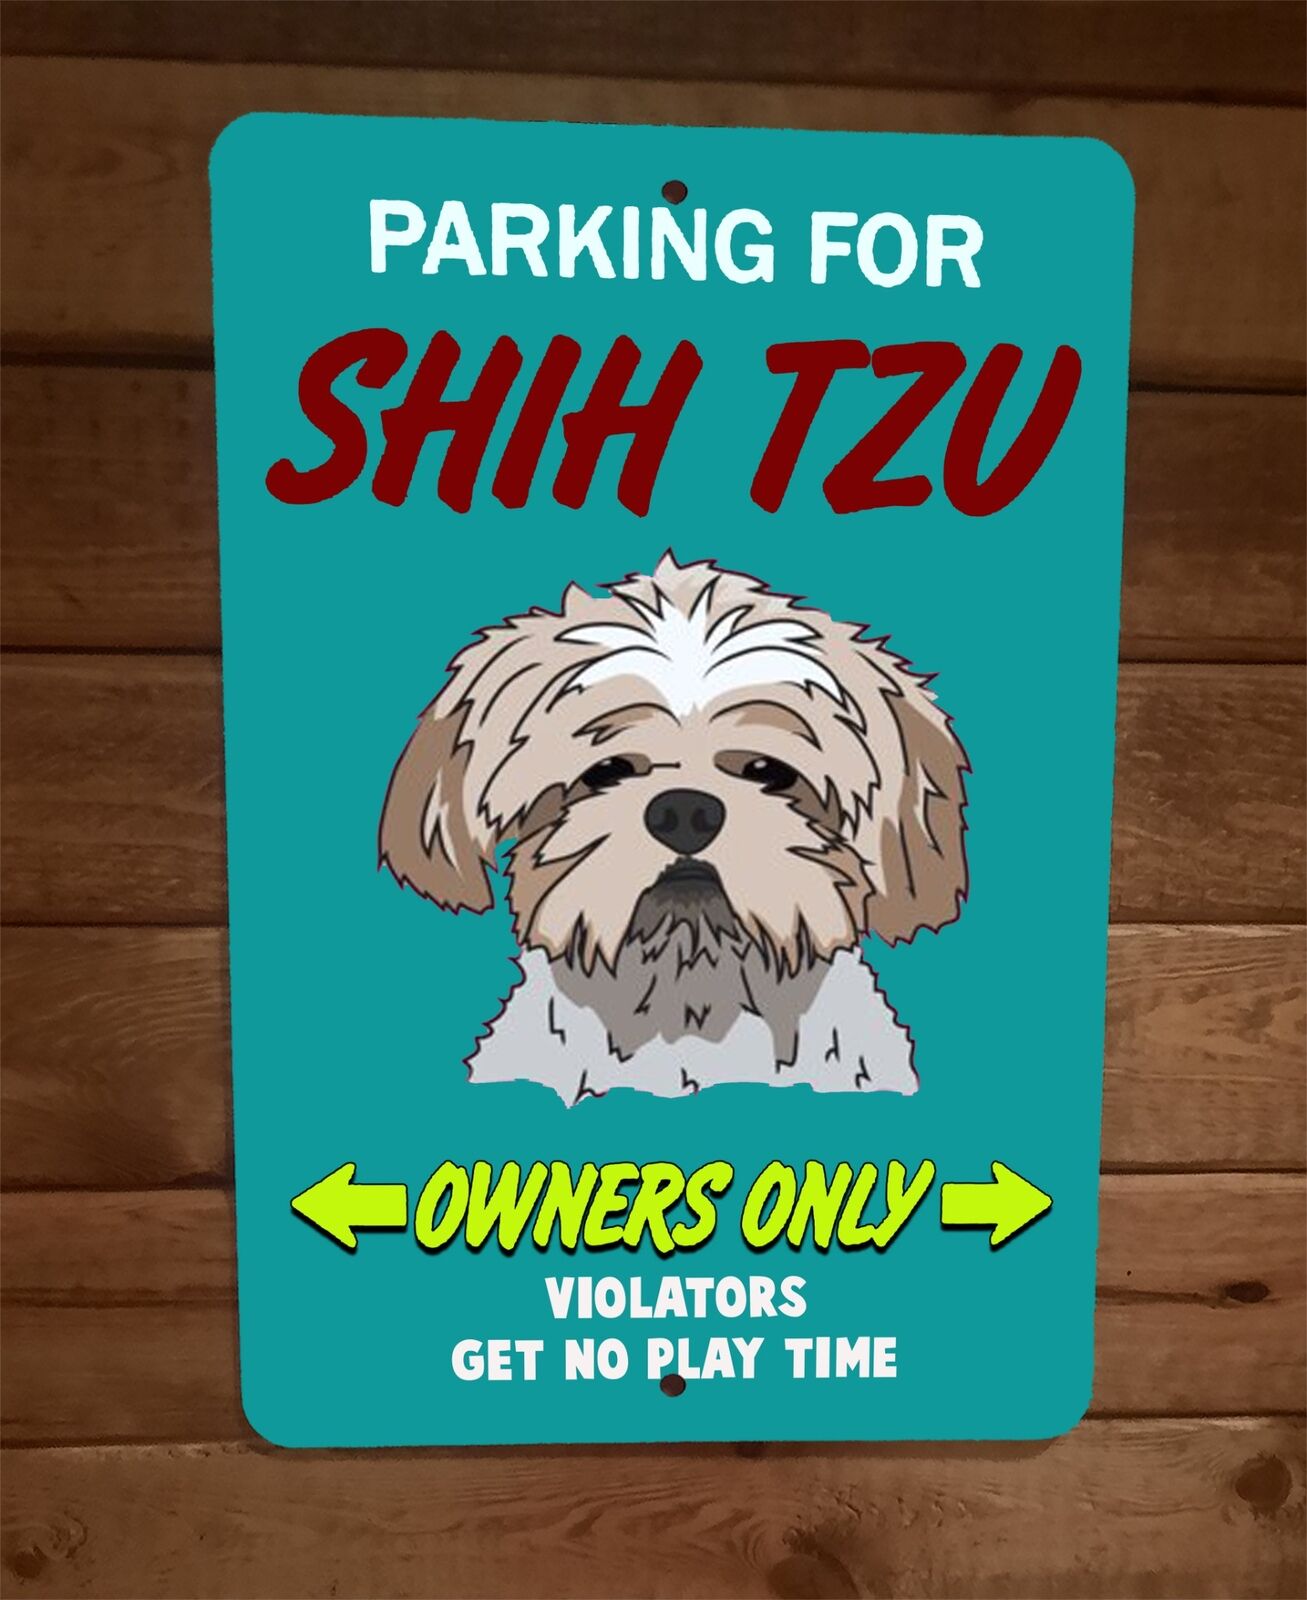 Parking for Shih Tzu Dog Owners Only 8x12 Metal Wall Sign Animal Poster